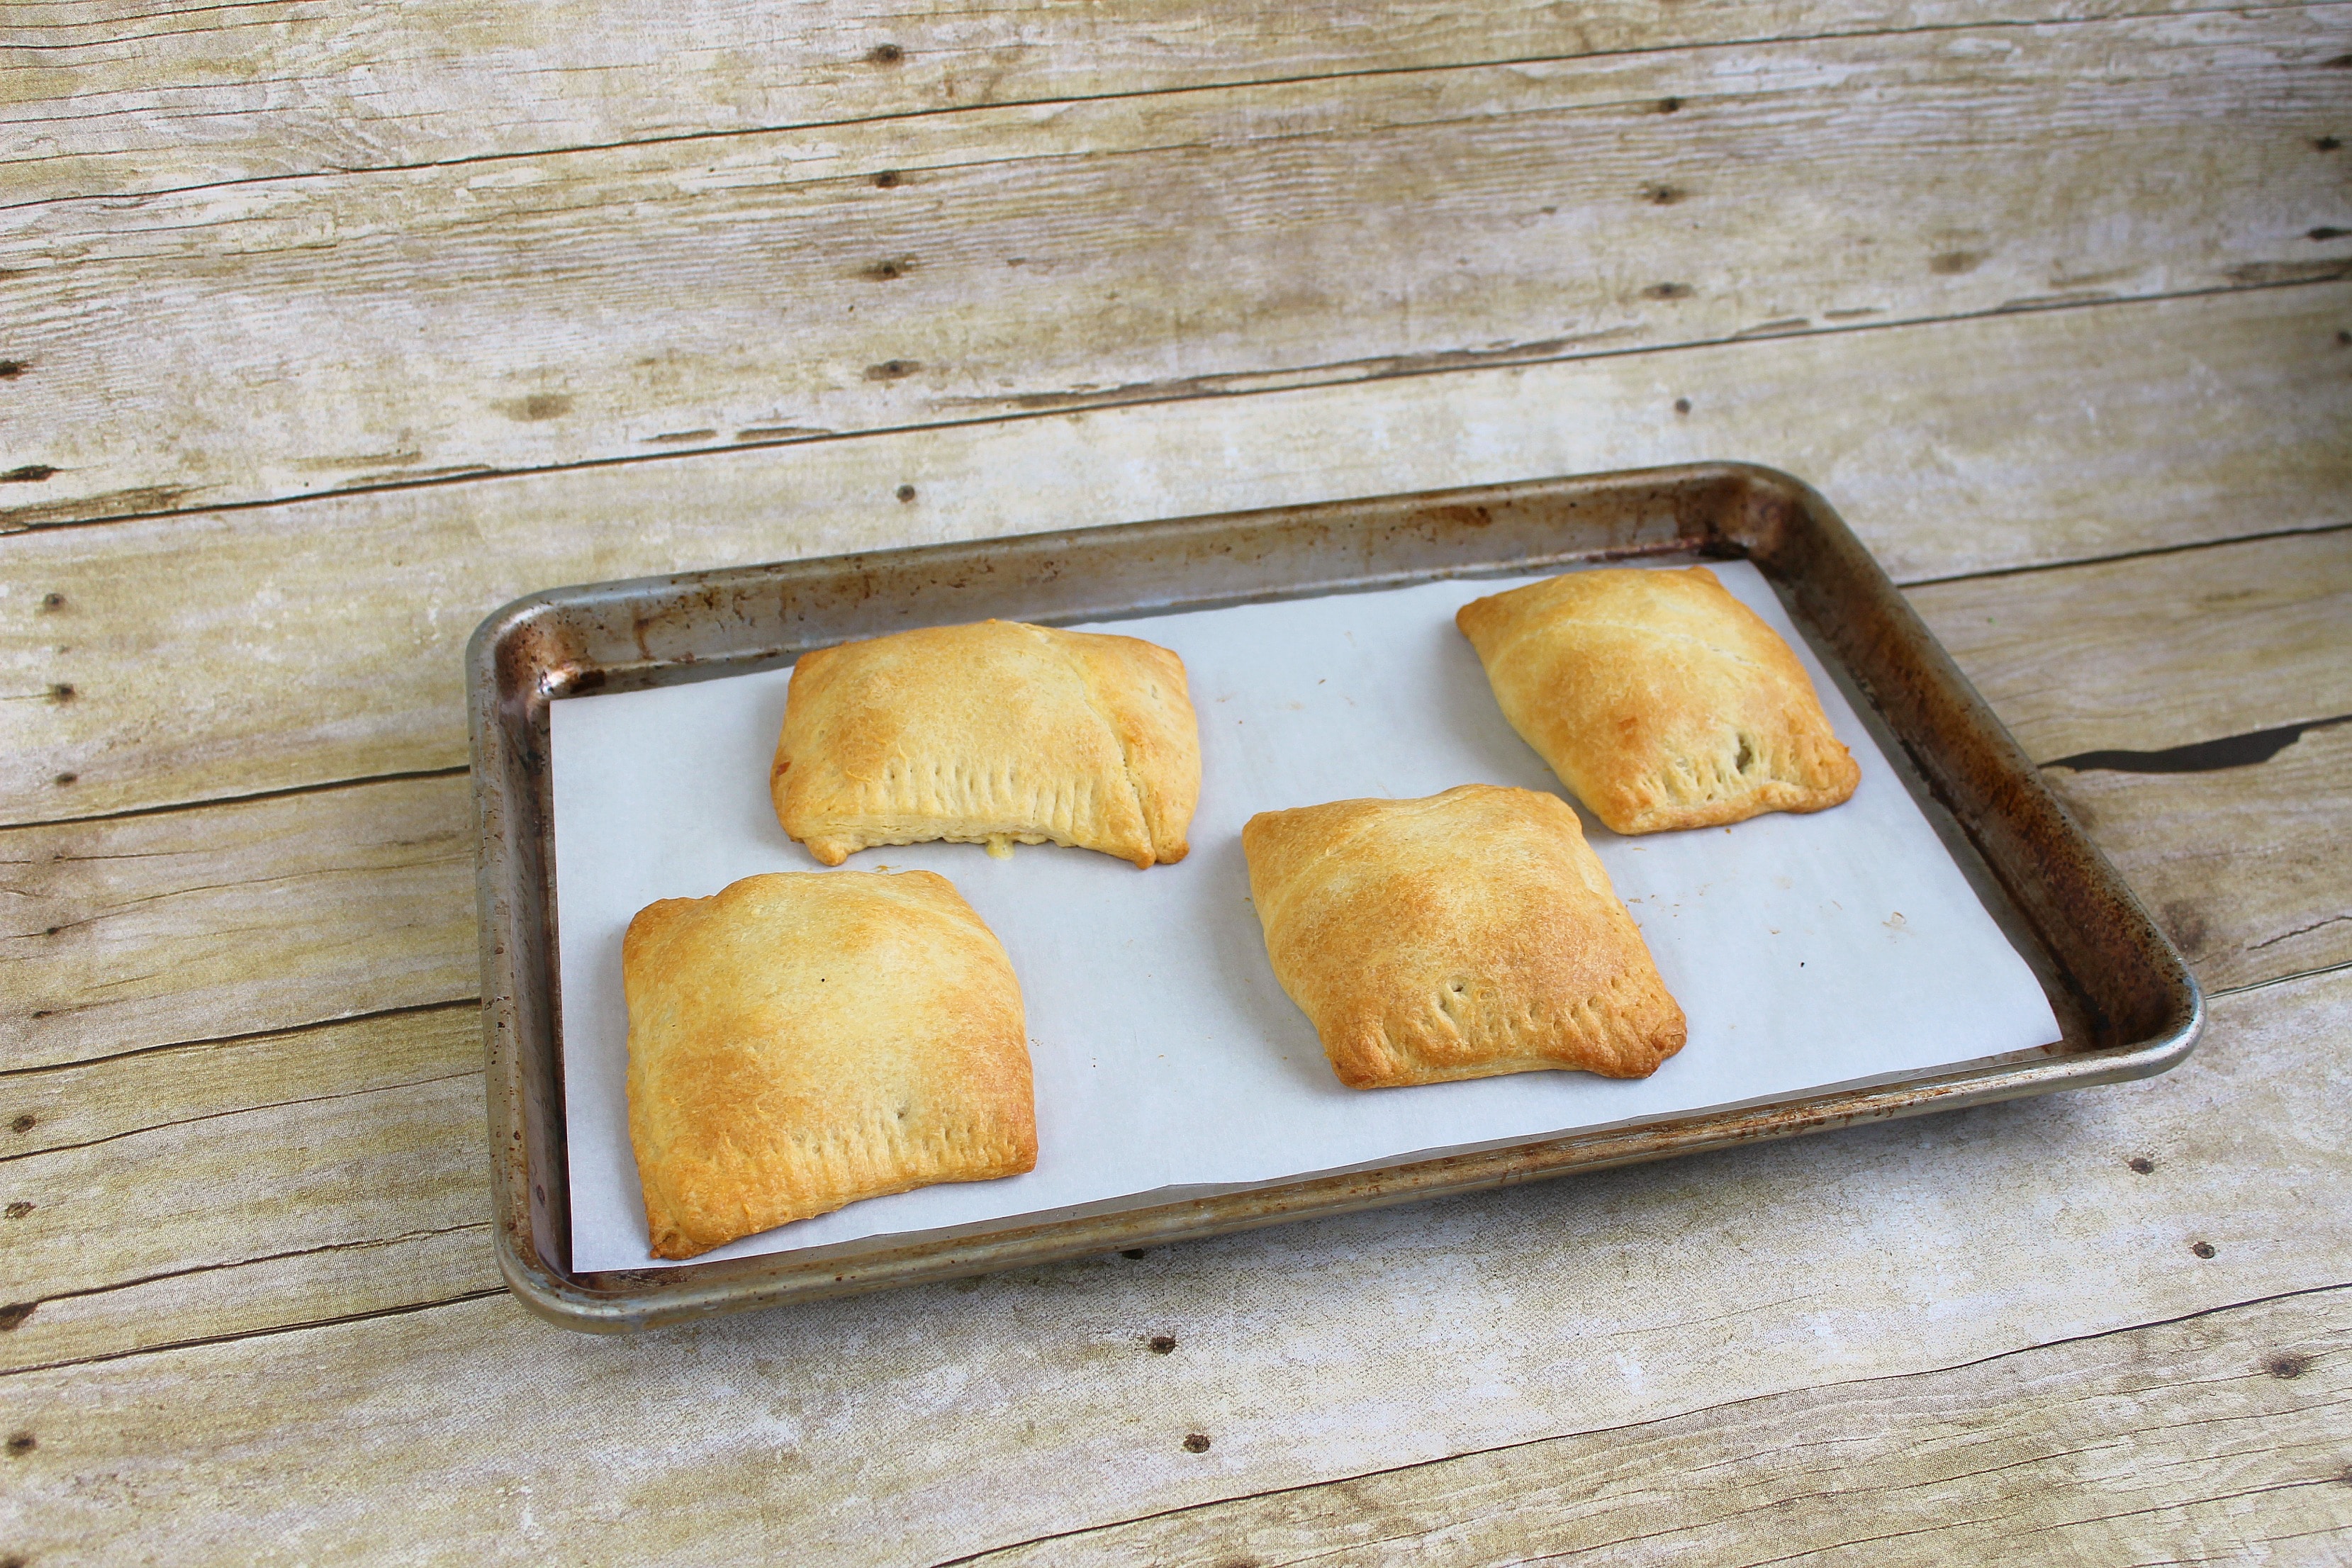 Step 7 of the Roasted Vegetable Pot Pie Pockets recipe is to bake for 20 minutes at 350 degrees and then enjoy!